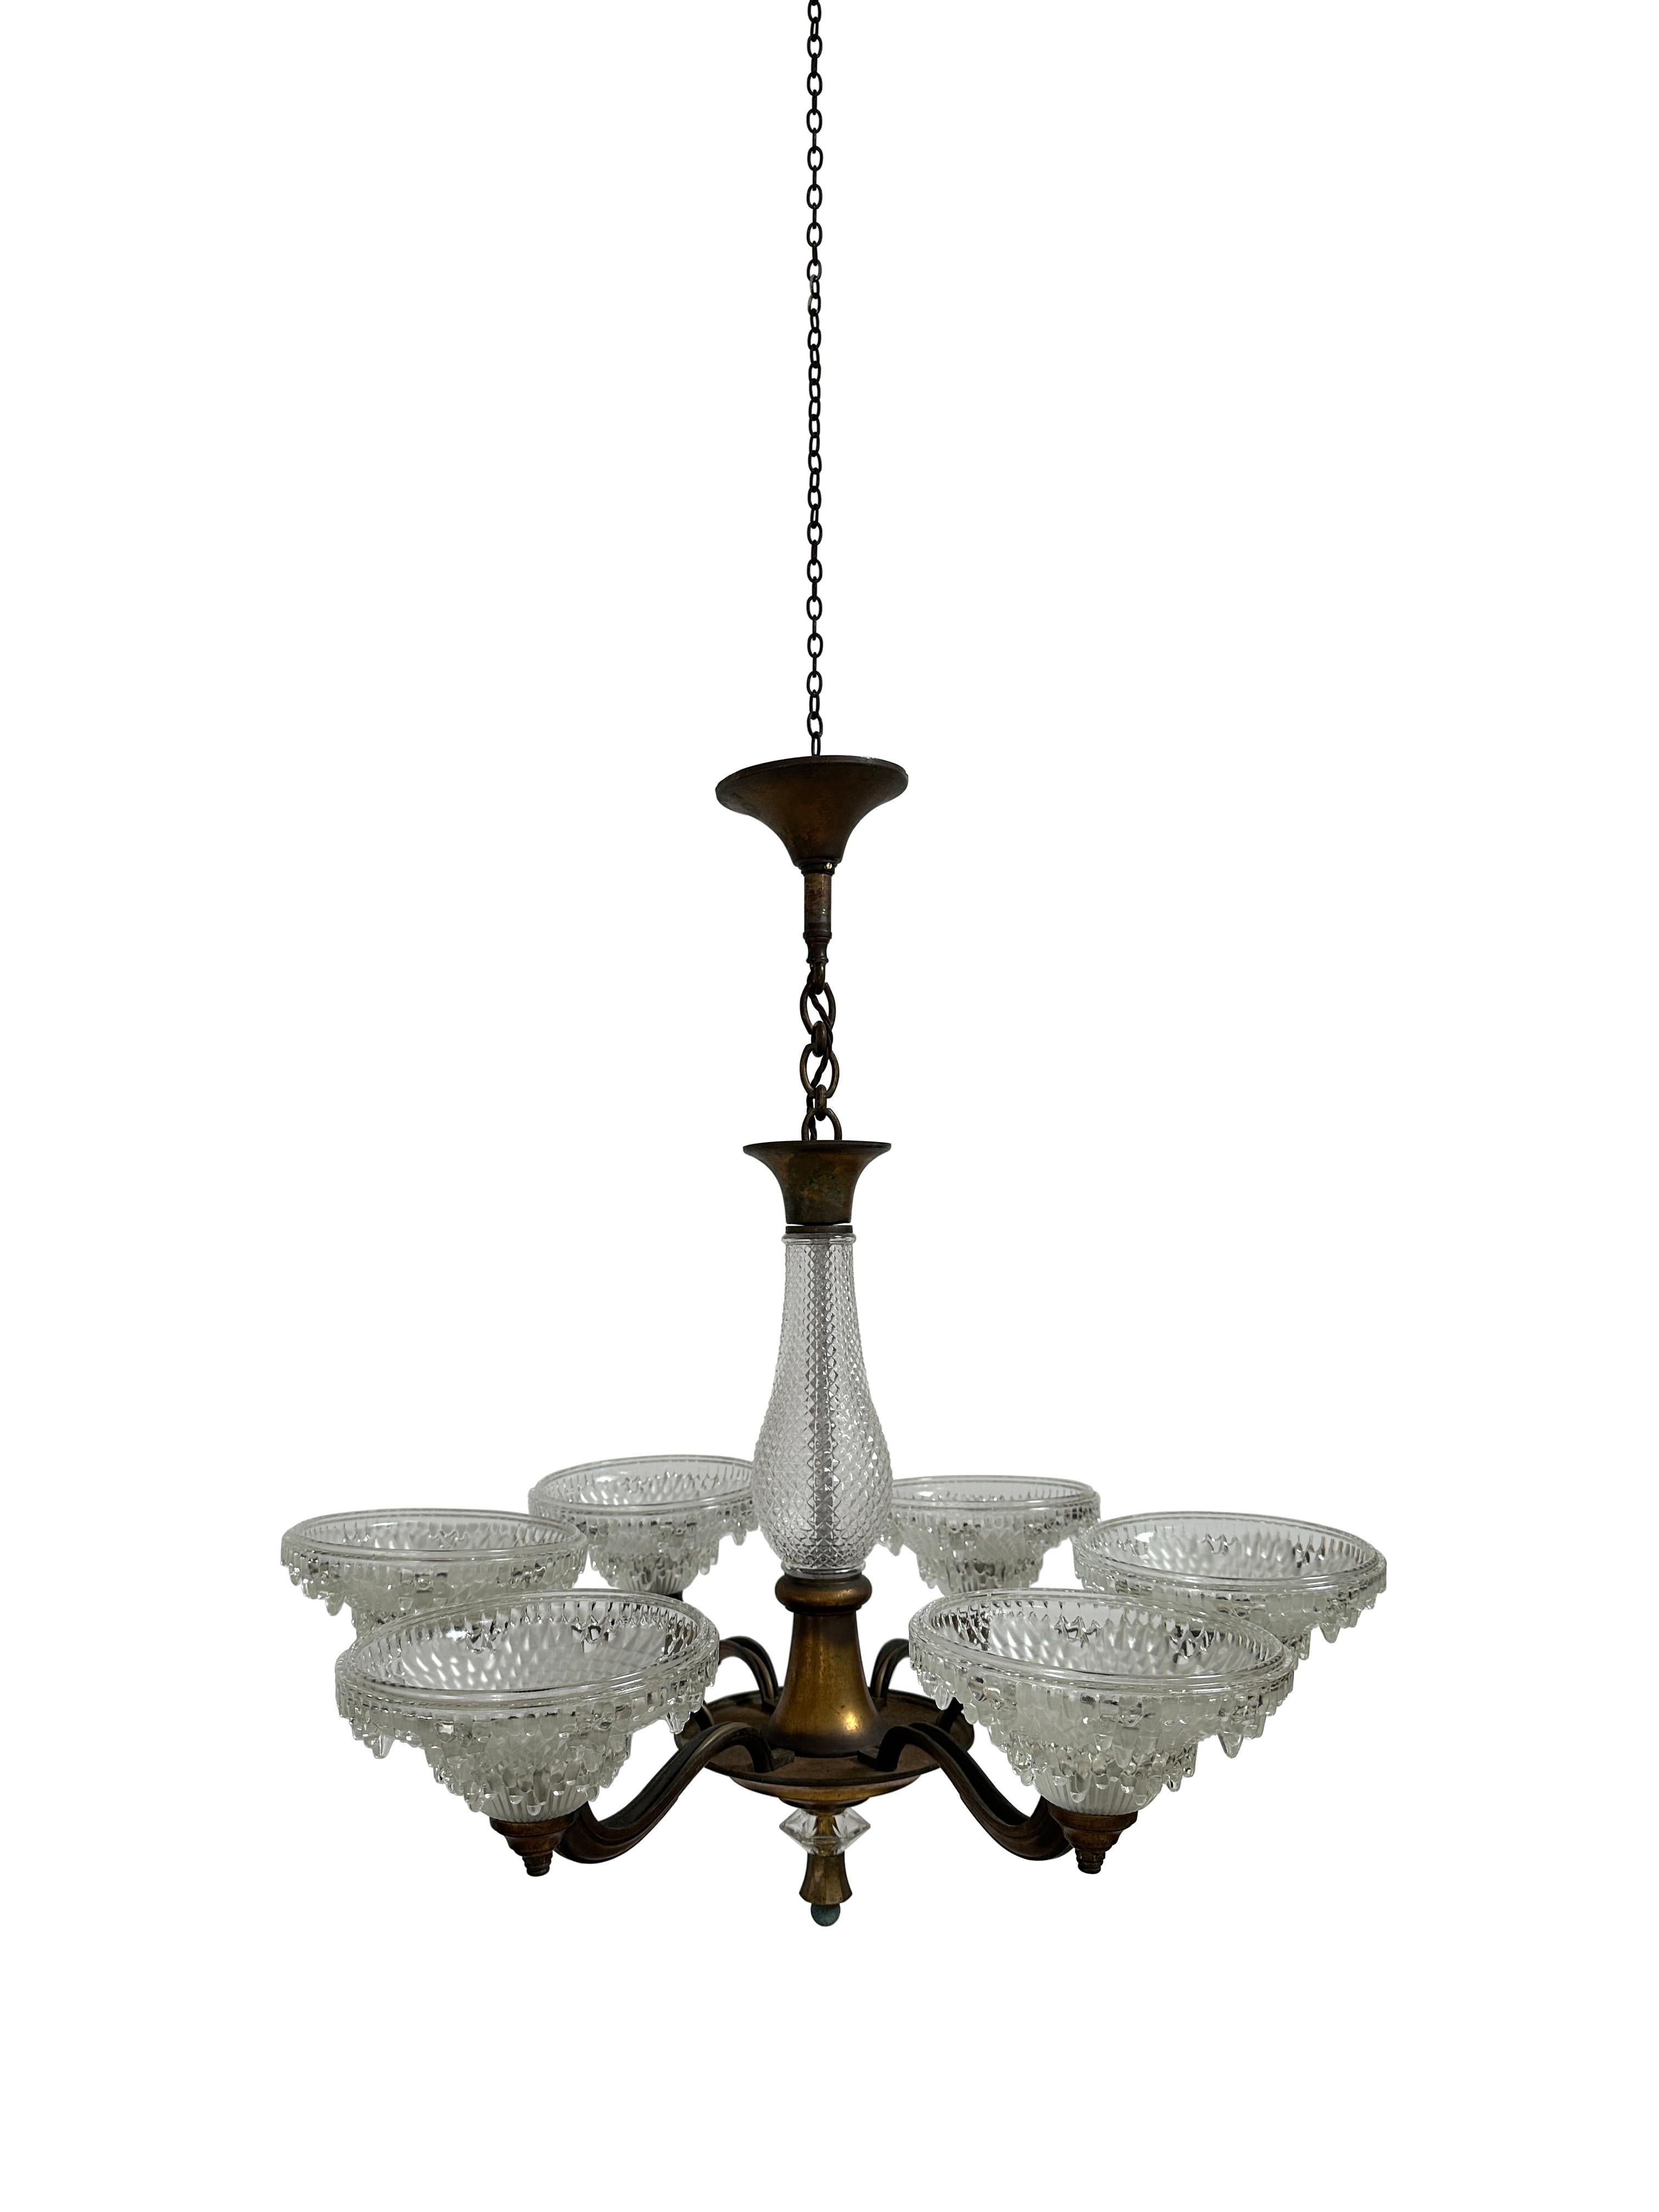 - A large French Art Deco gilded bronze six-arm ceiling chandelier featuring high-quality glasswork typical of Ezan, French circa 1930.
- The fixture comprises of six arched decorative arms encompassing opalescent glass shades with icicle detail